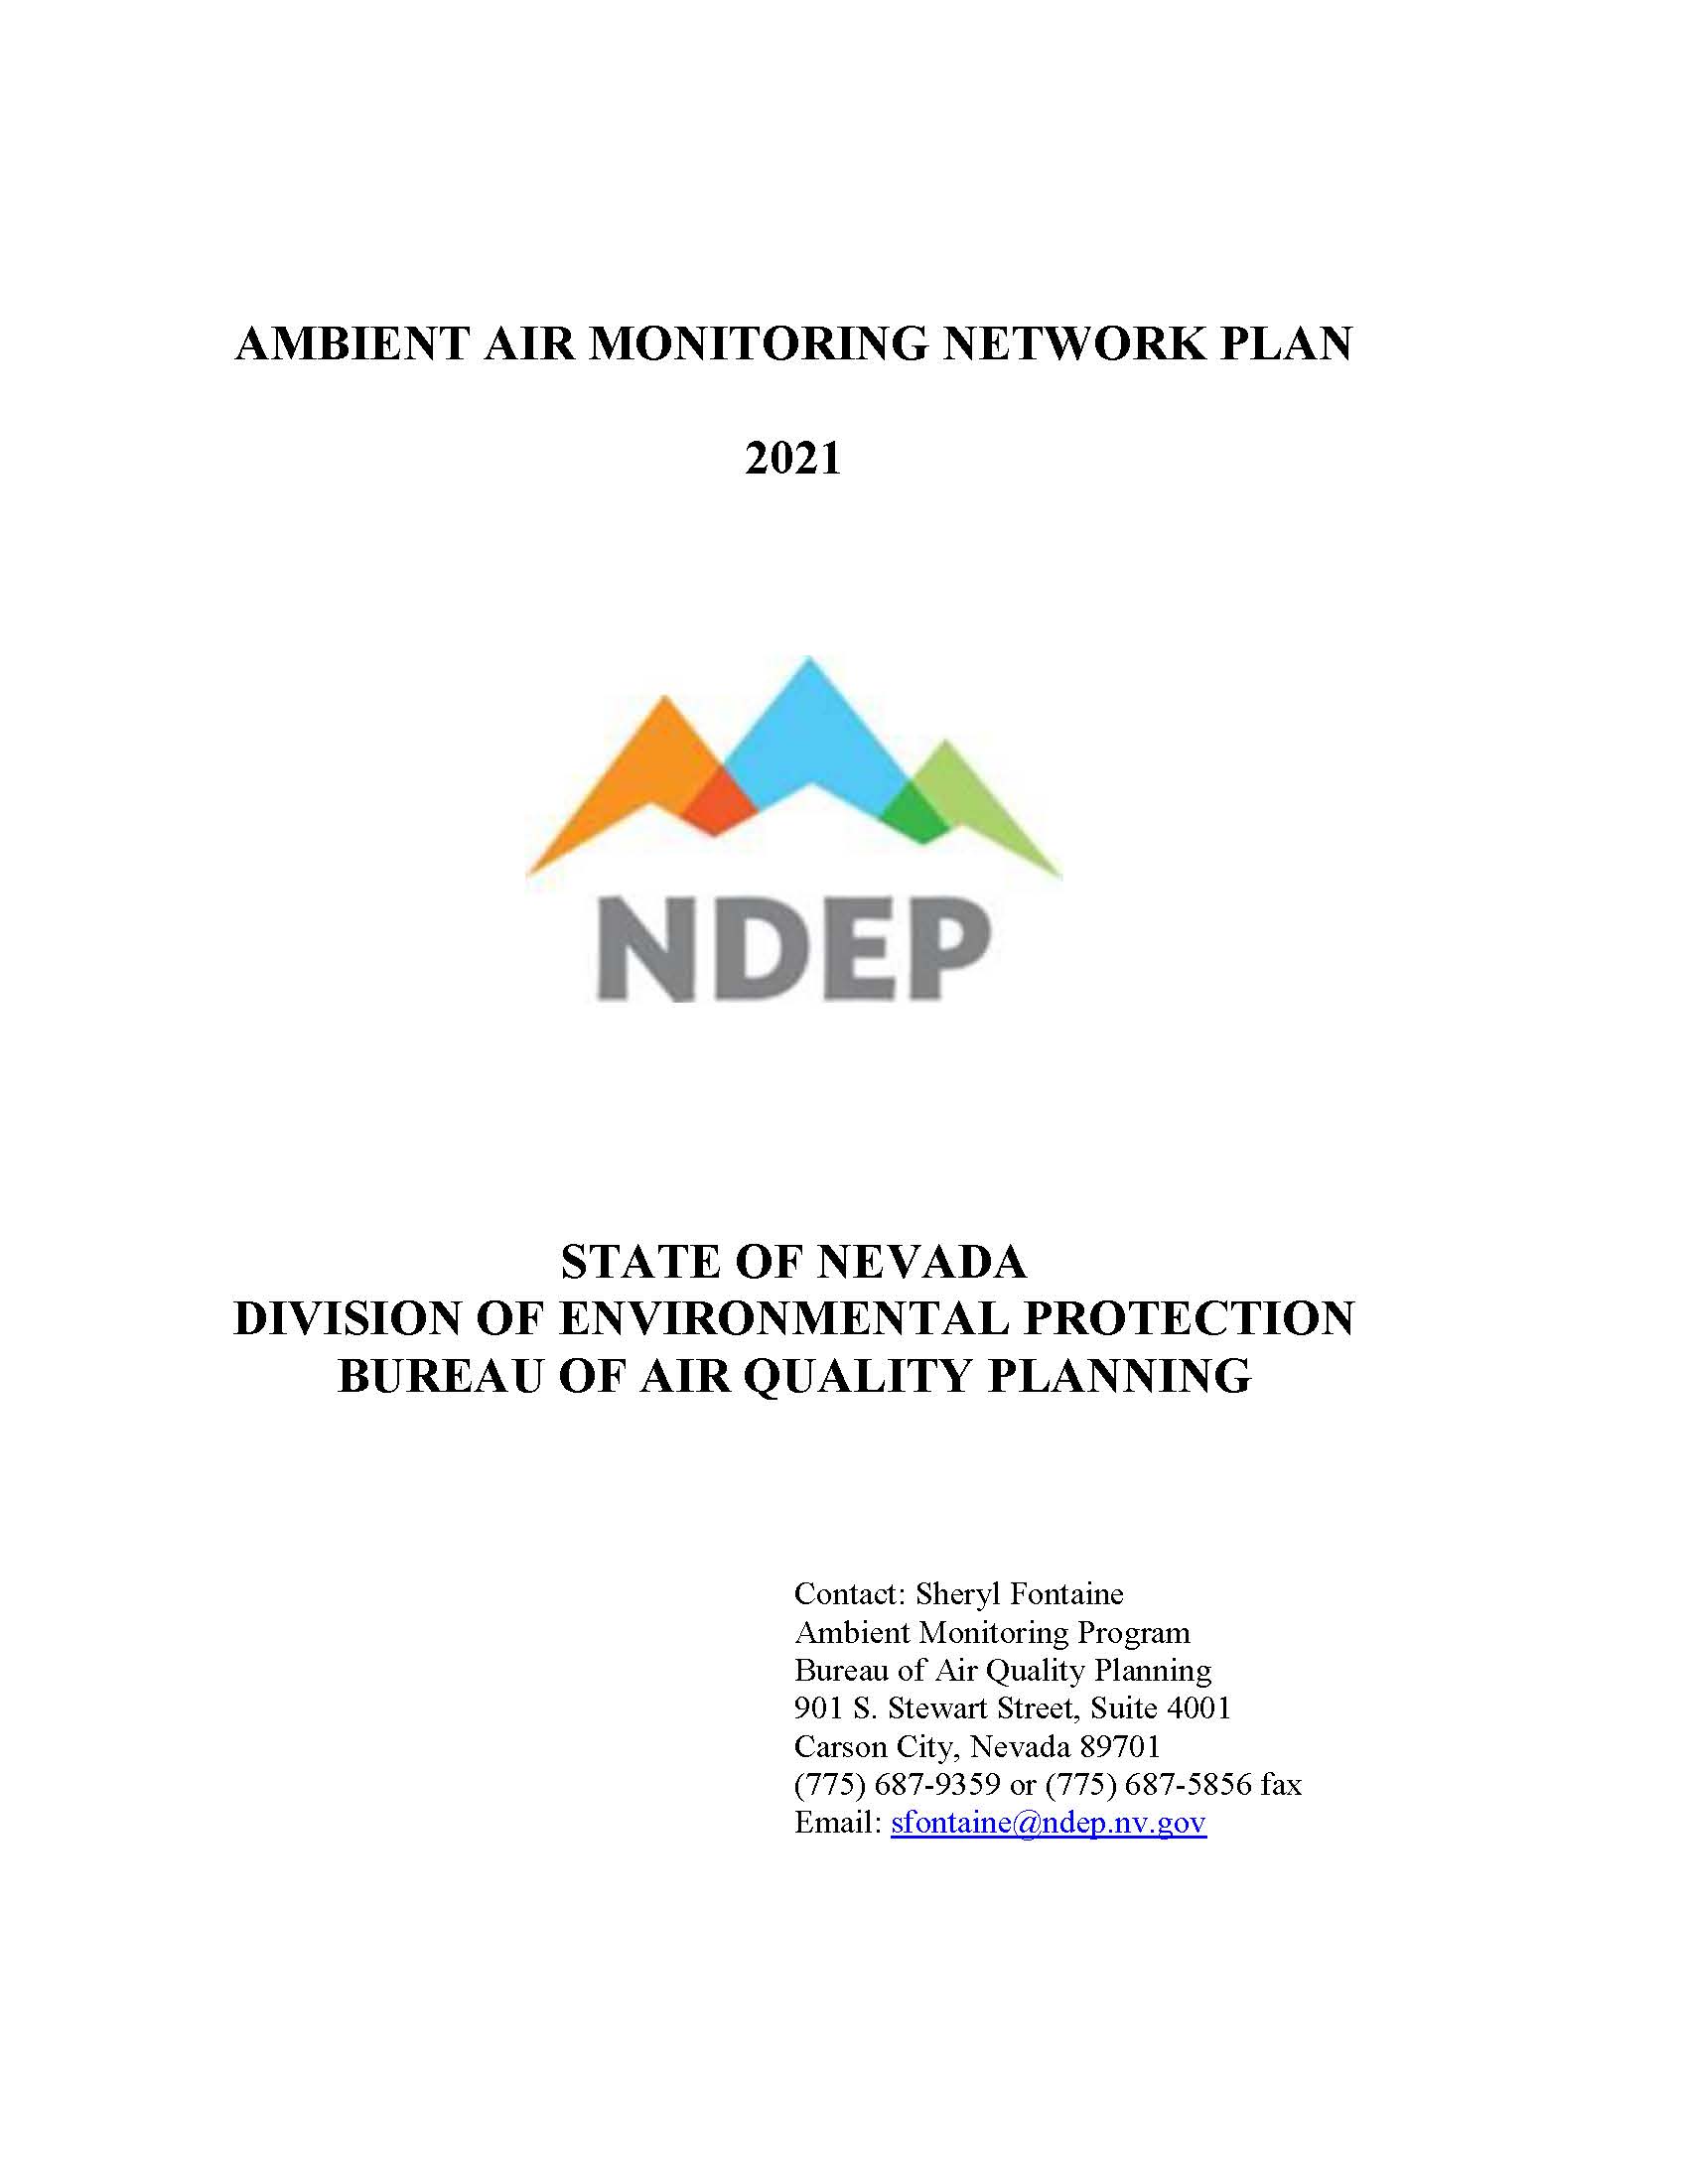 2021 Ambient Air Monitoring Network Plan